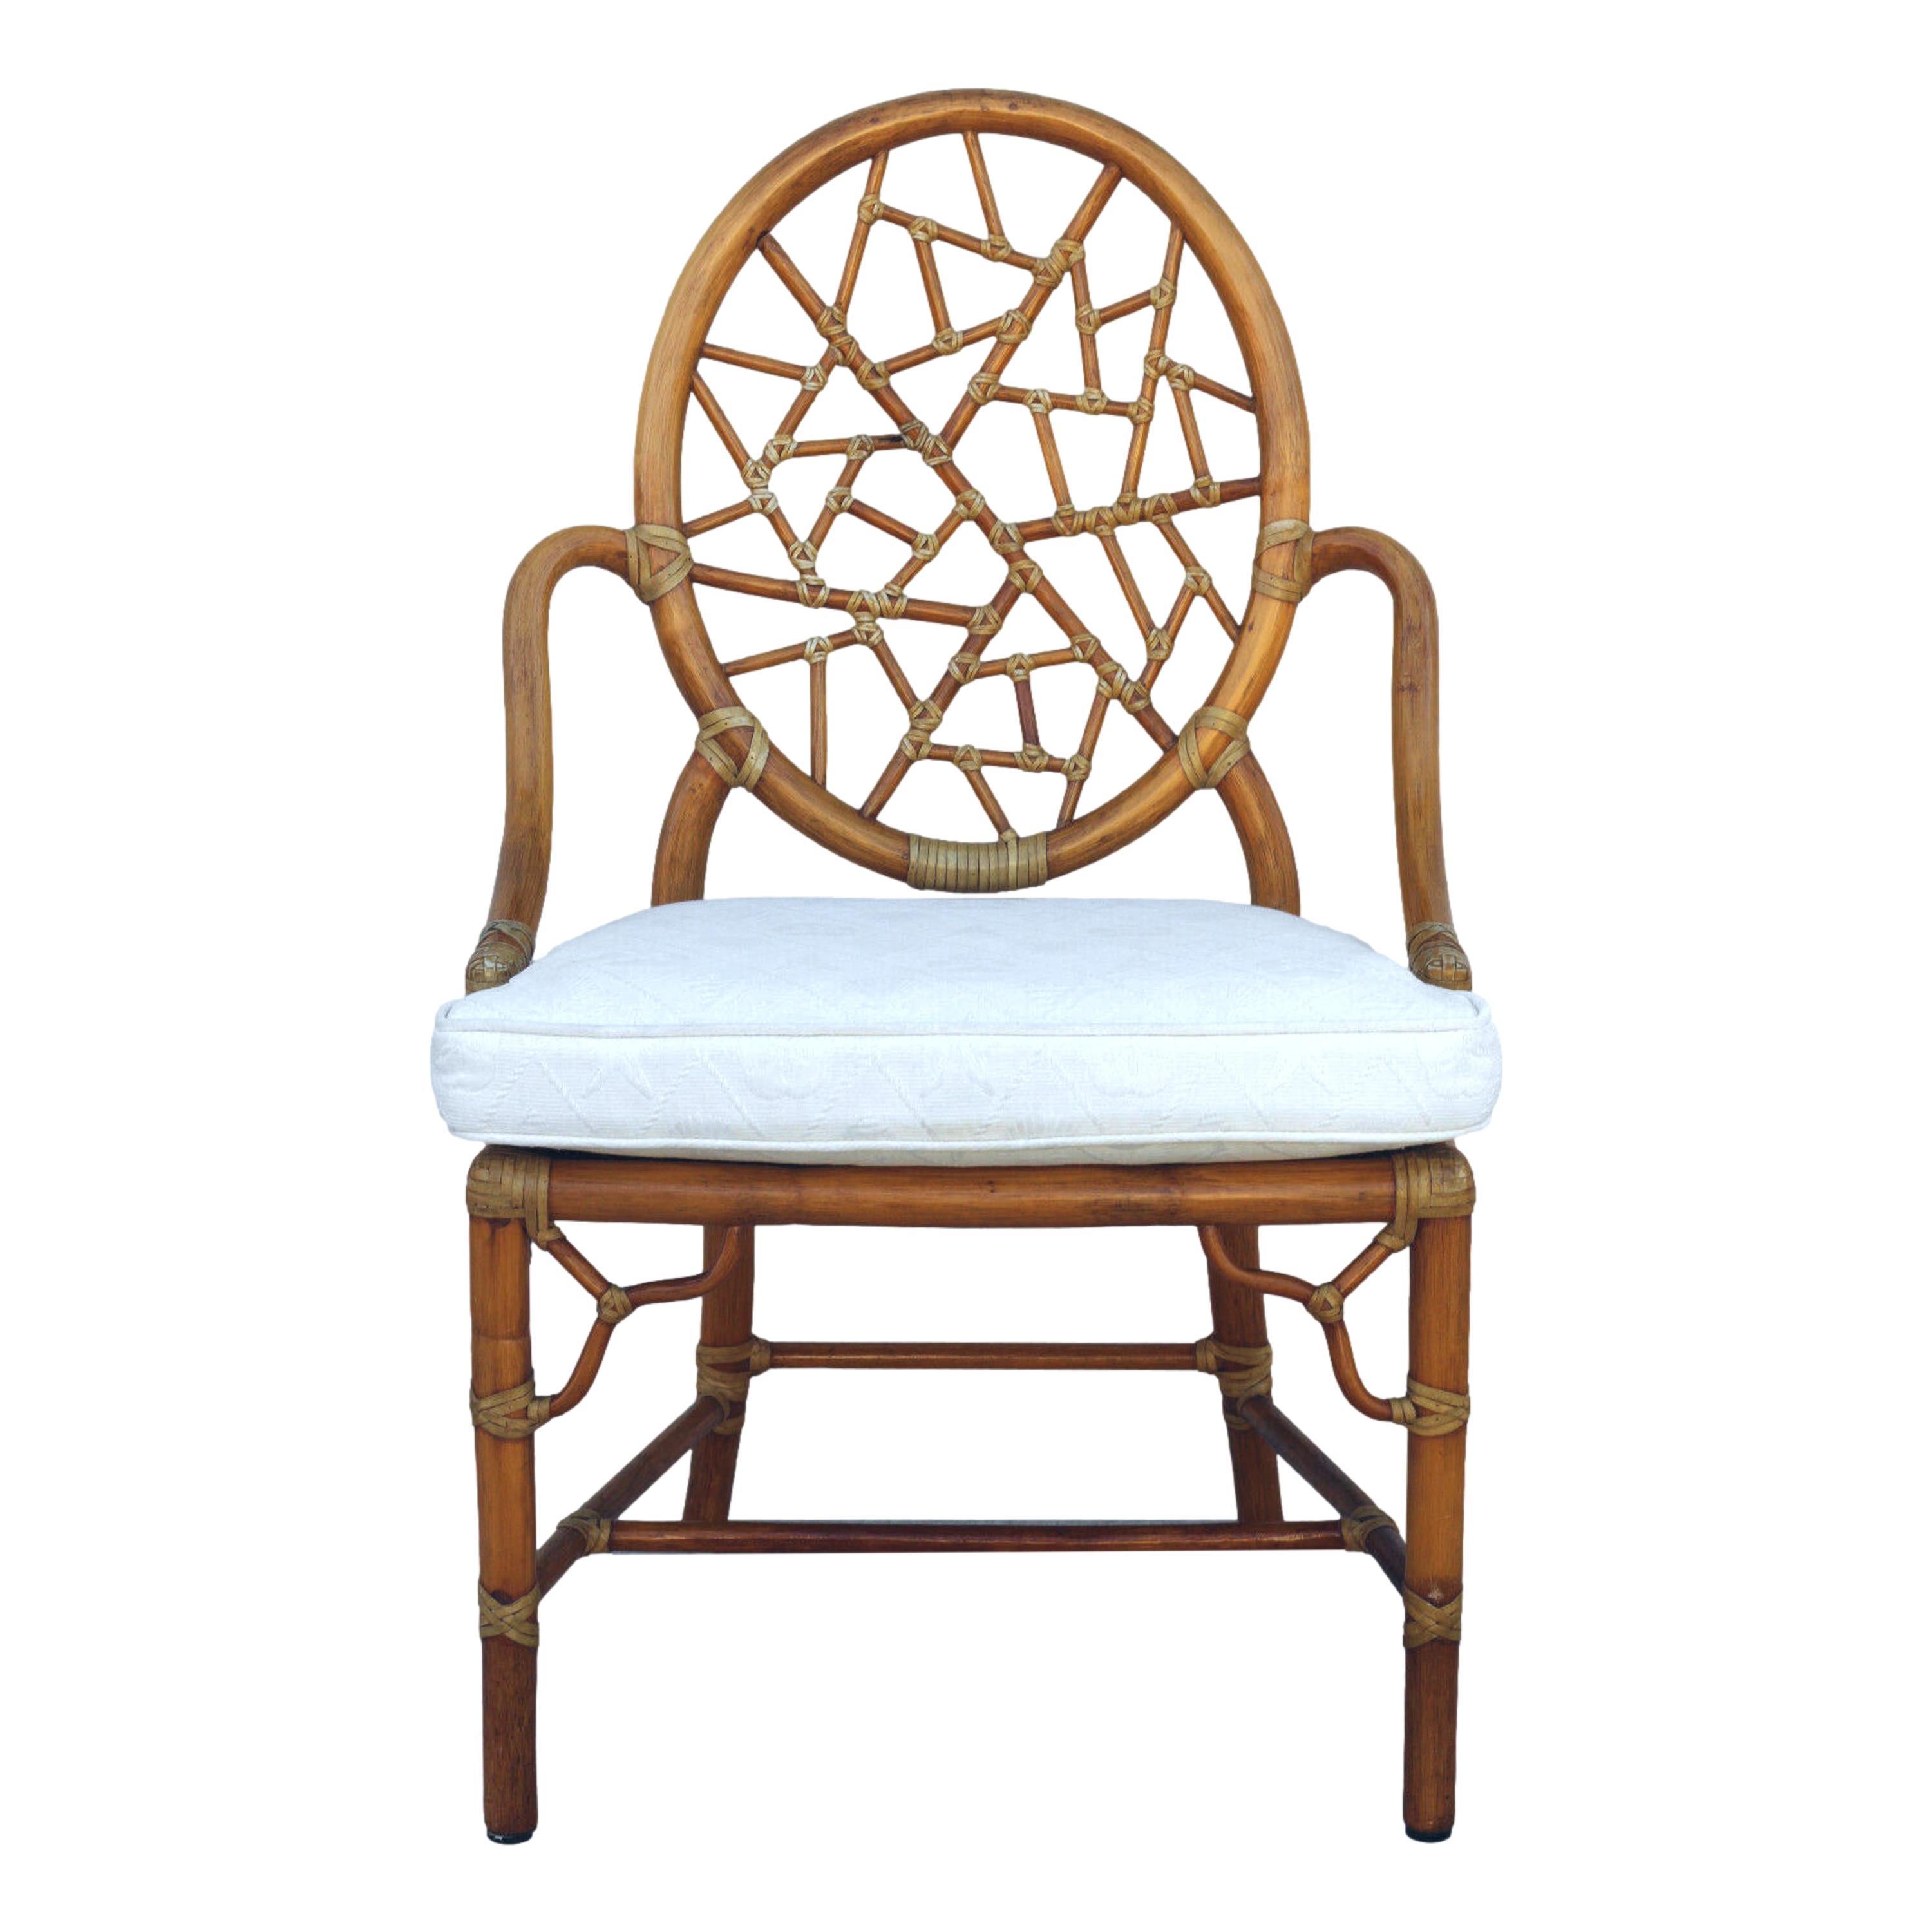 Set of eight iconic cracked ice chairs designed by breakthrough innovator Elinor McGuire in 1968. The design is famous for its rattan oval back that frames smaller rattan pieces bound by rawhide, creating the impression of cracked ice or shattered